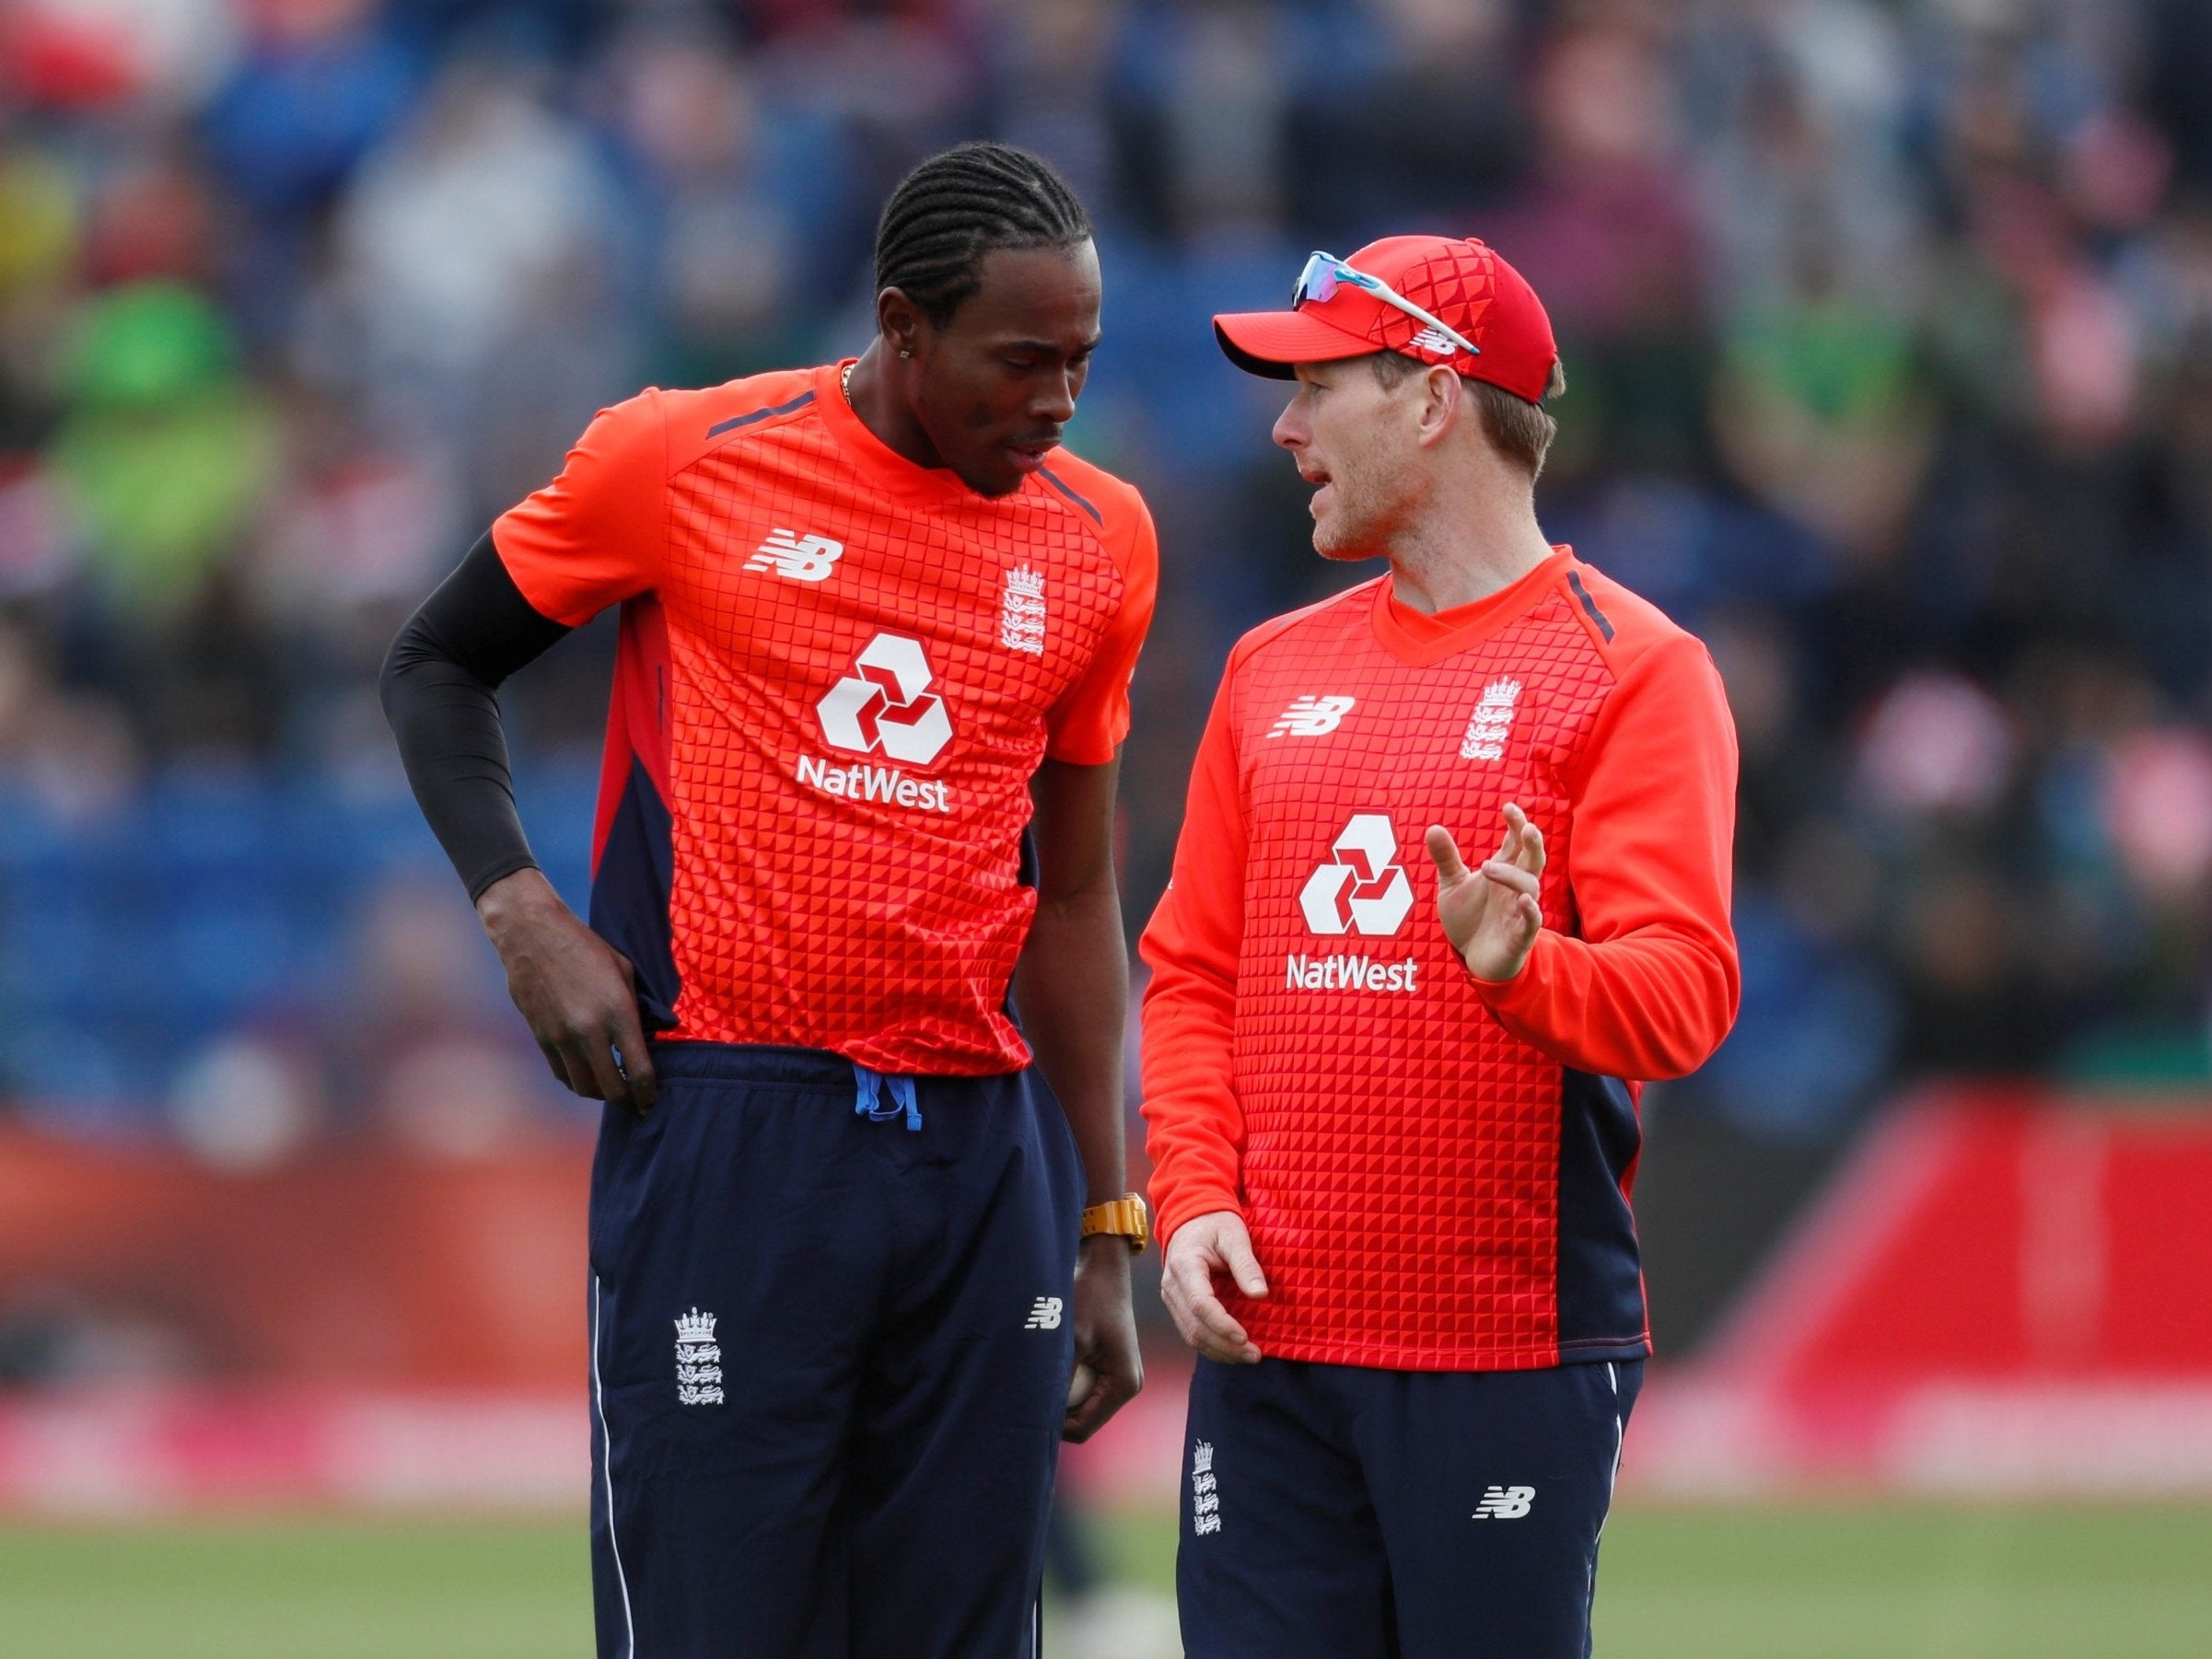 Jofra Archer and Eoin Morgan discuss during the game